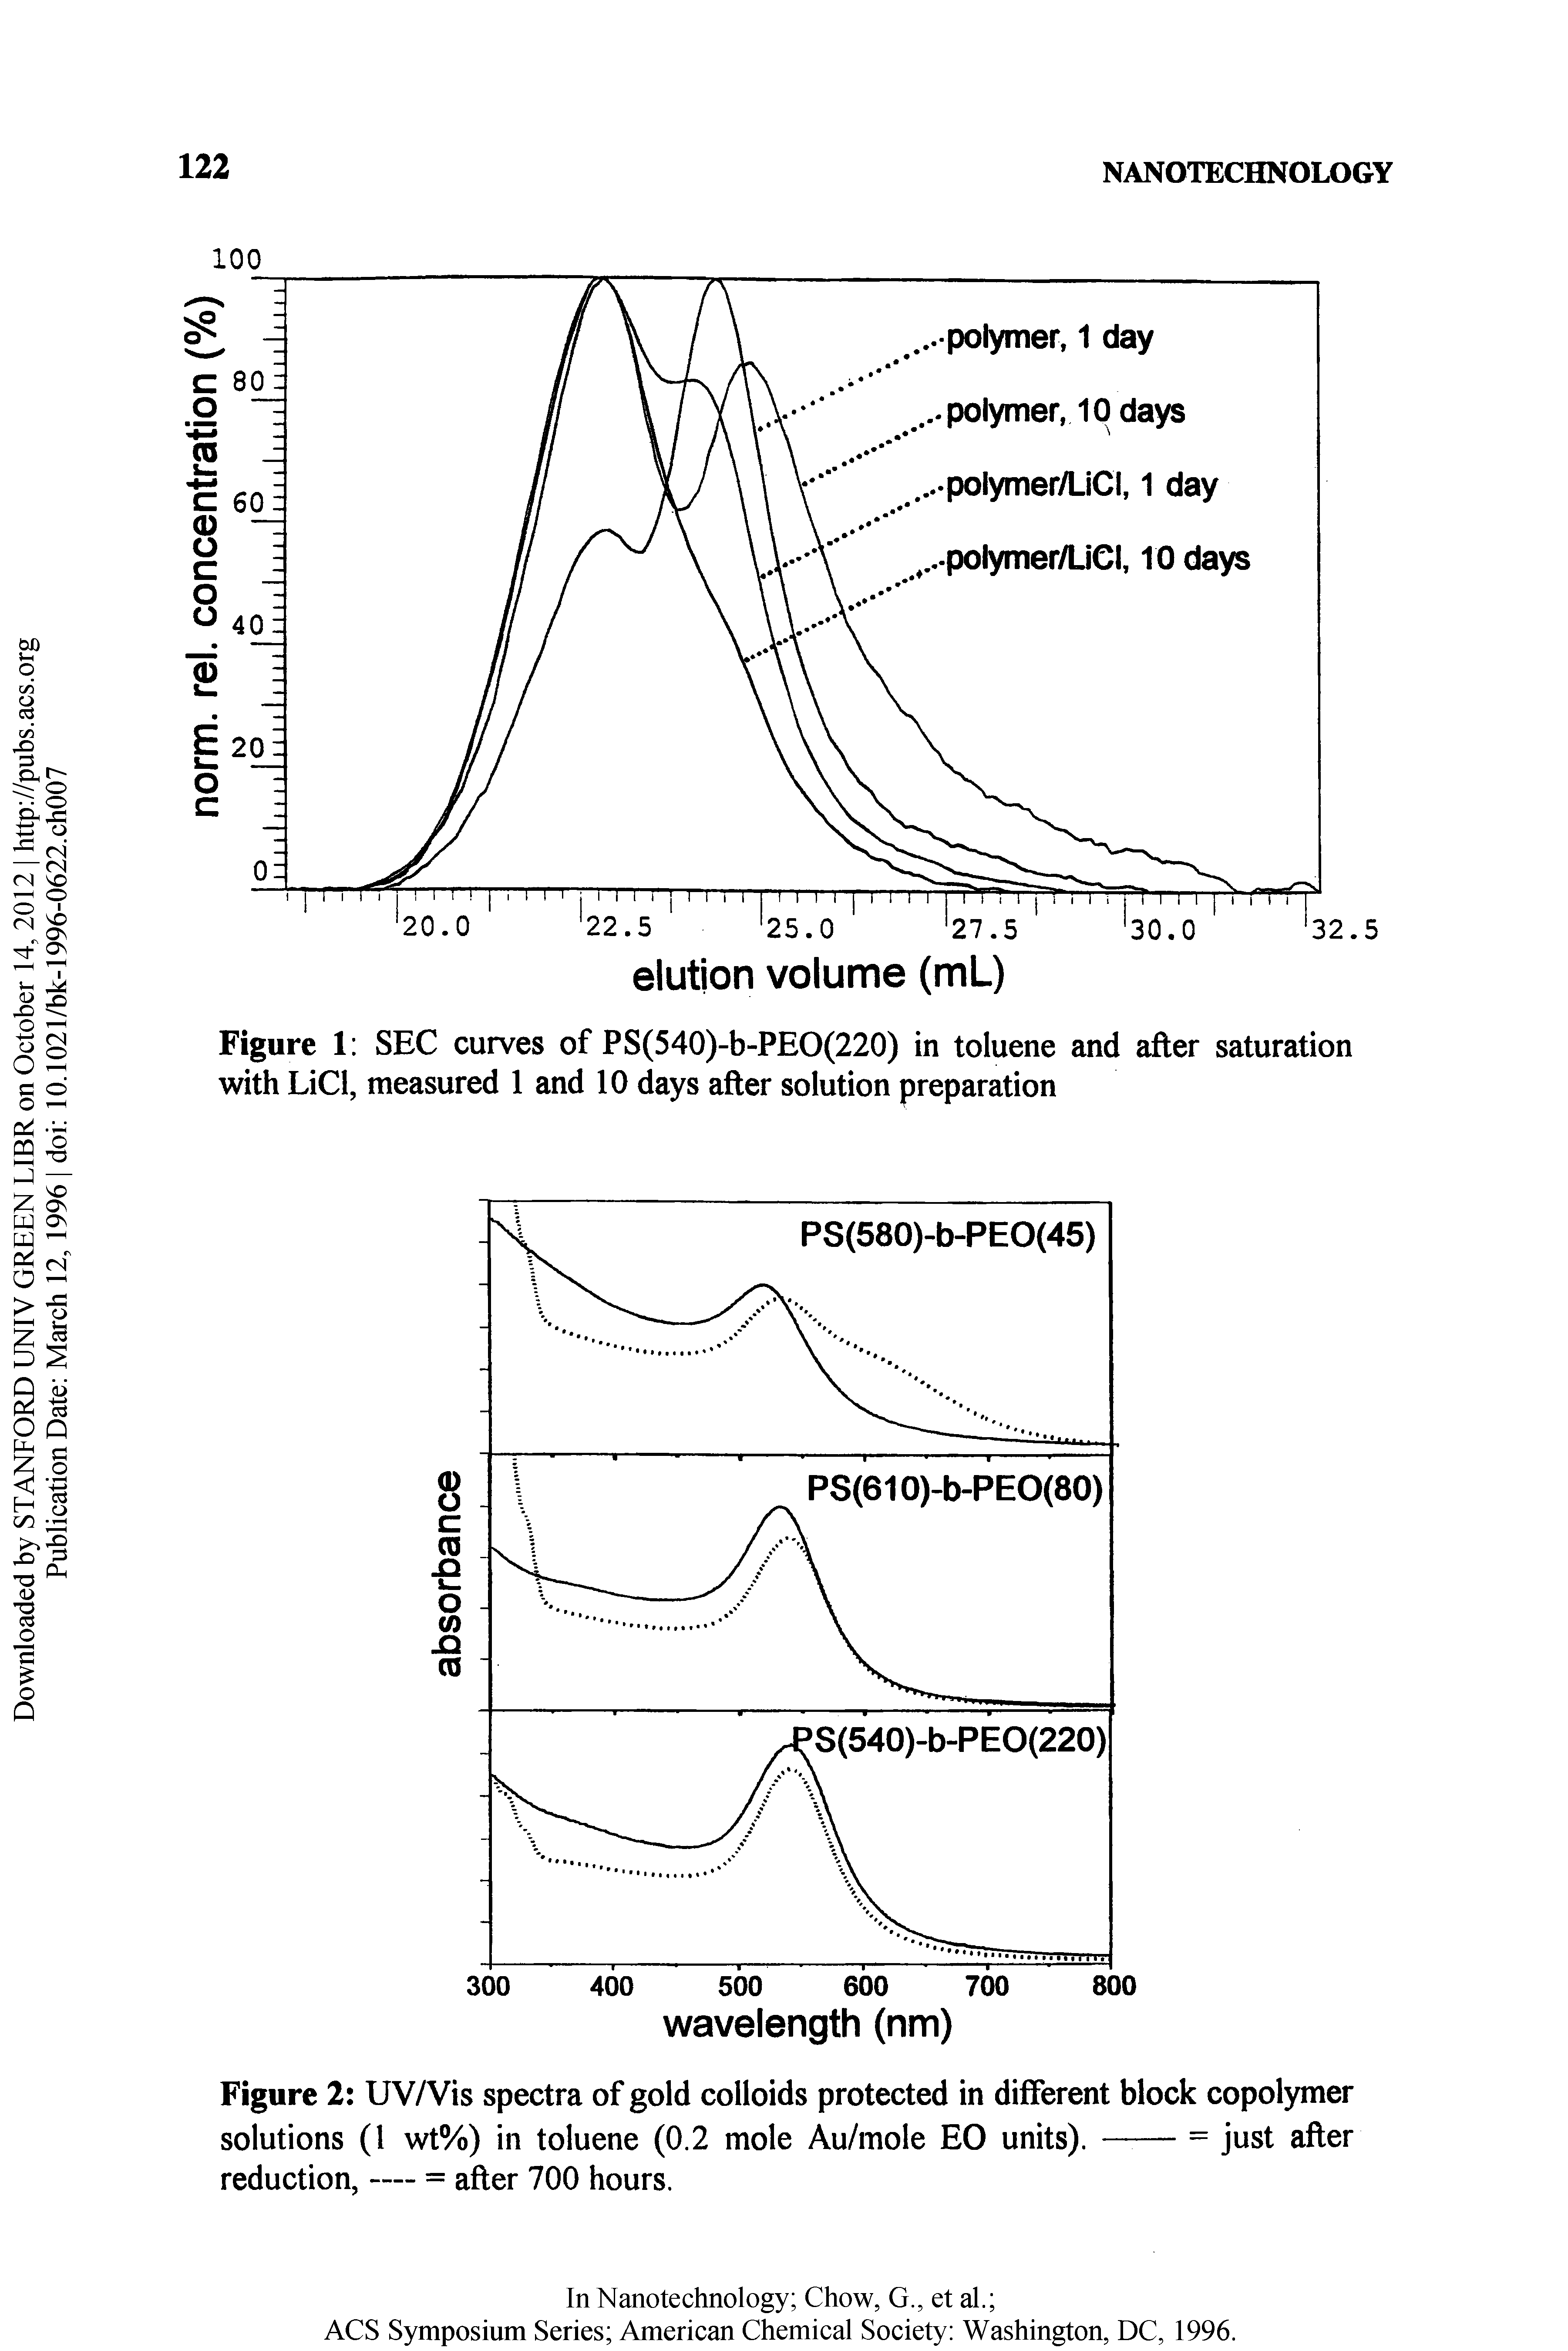 Figure 2 UV/Vis spectra of gold colloids protected in different block copolymer solutions (1 wt%) in toluene (0.2 mole Au/mole EO units). —— = just after reduction, — = after 700 hours.